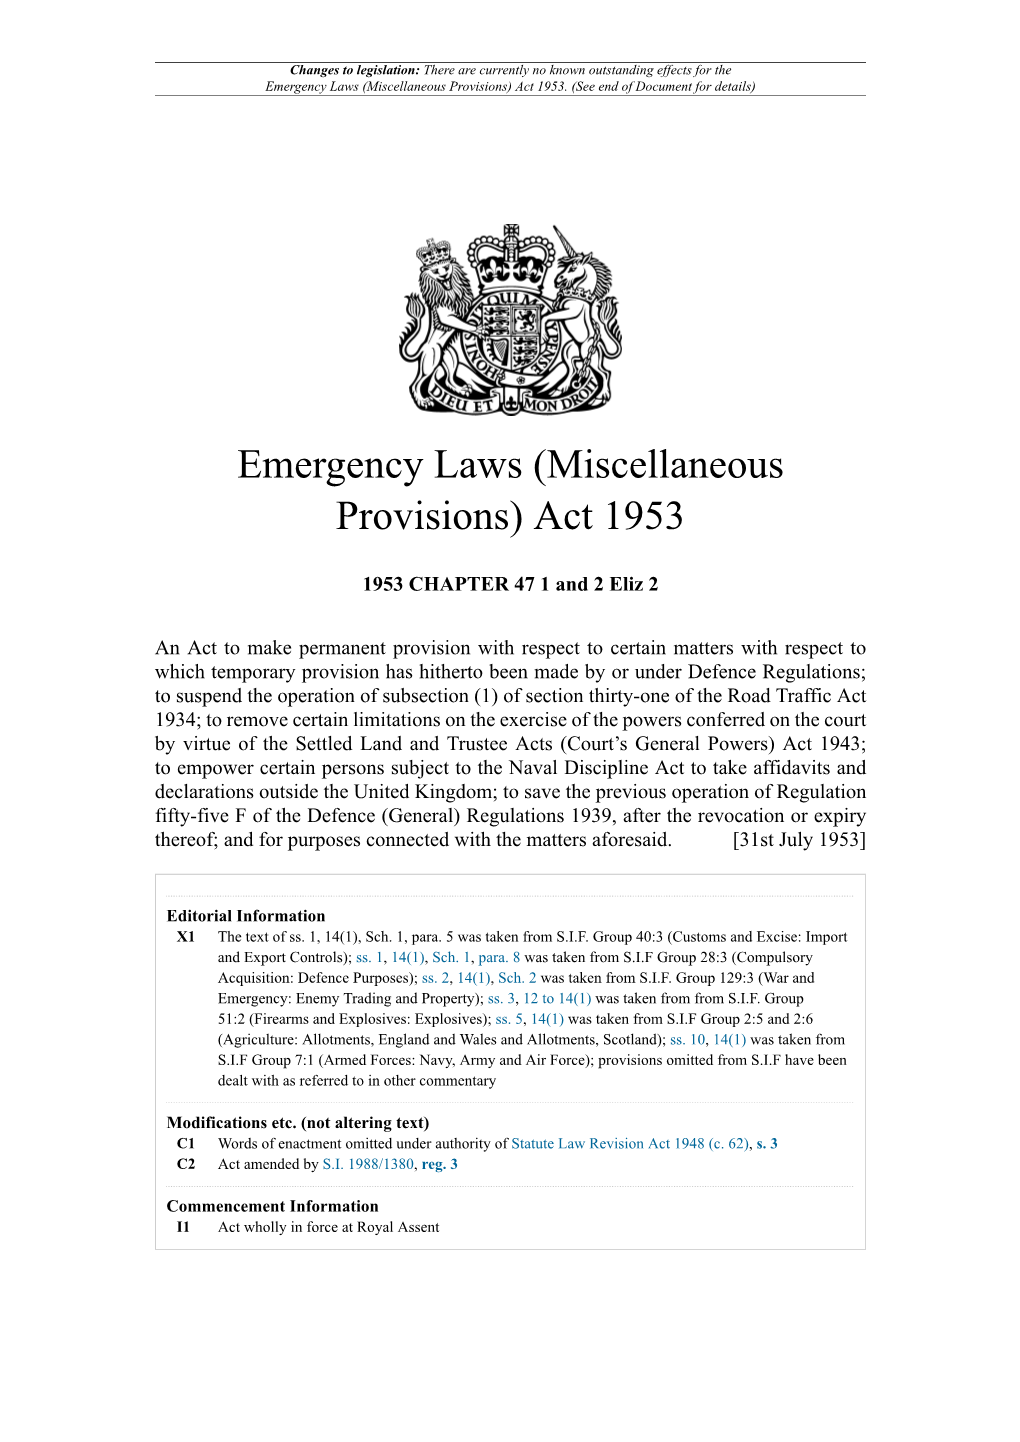 Emergency Laws (Miscellaneous Provisions) Act 1953